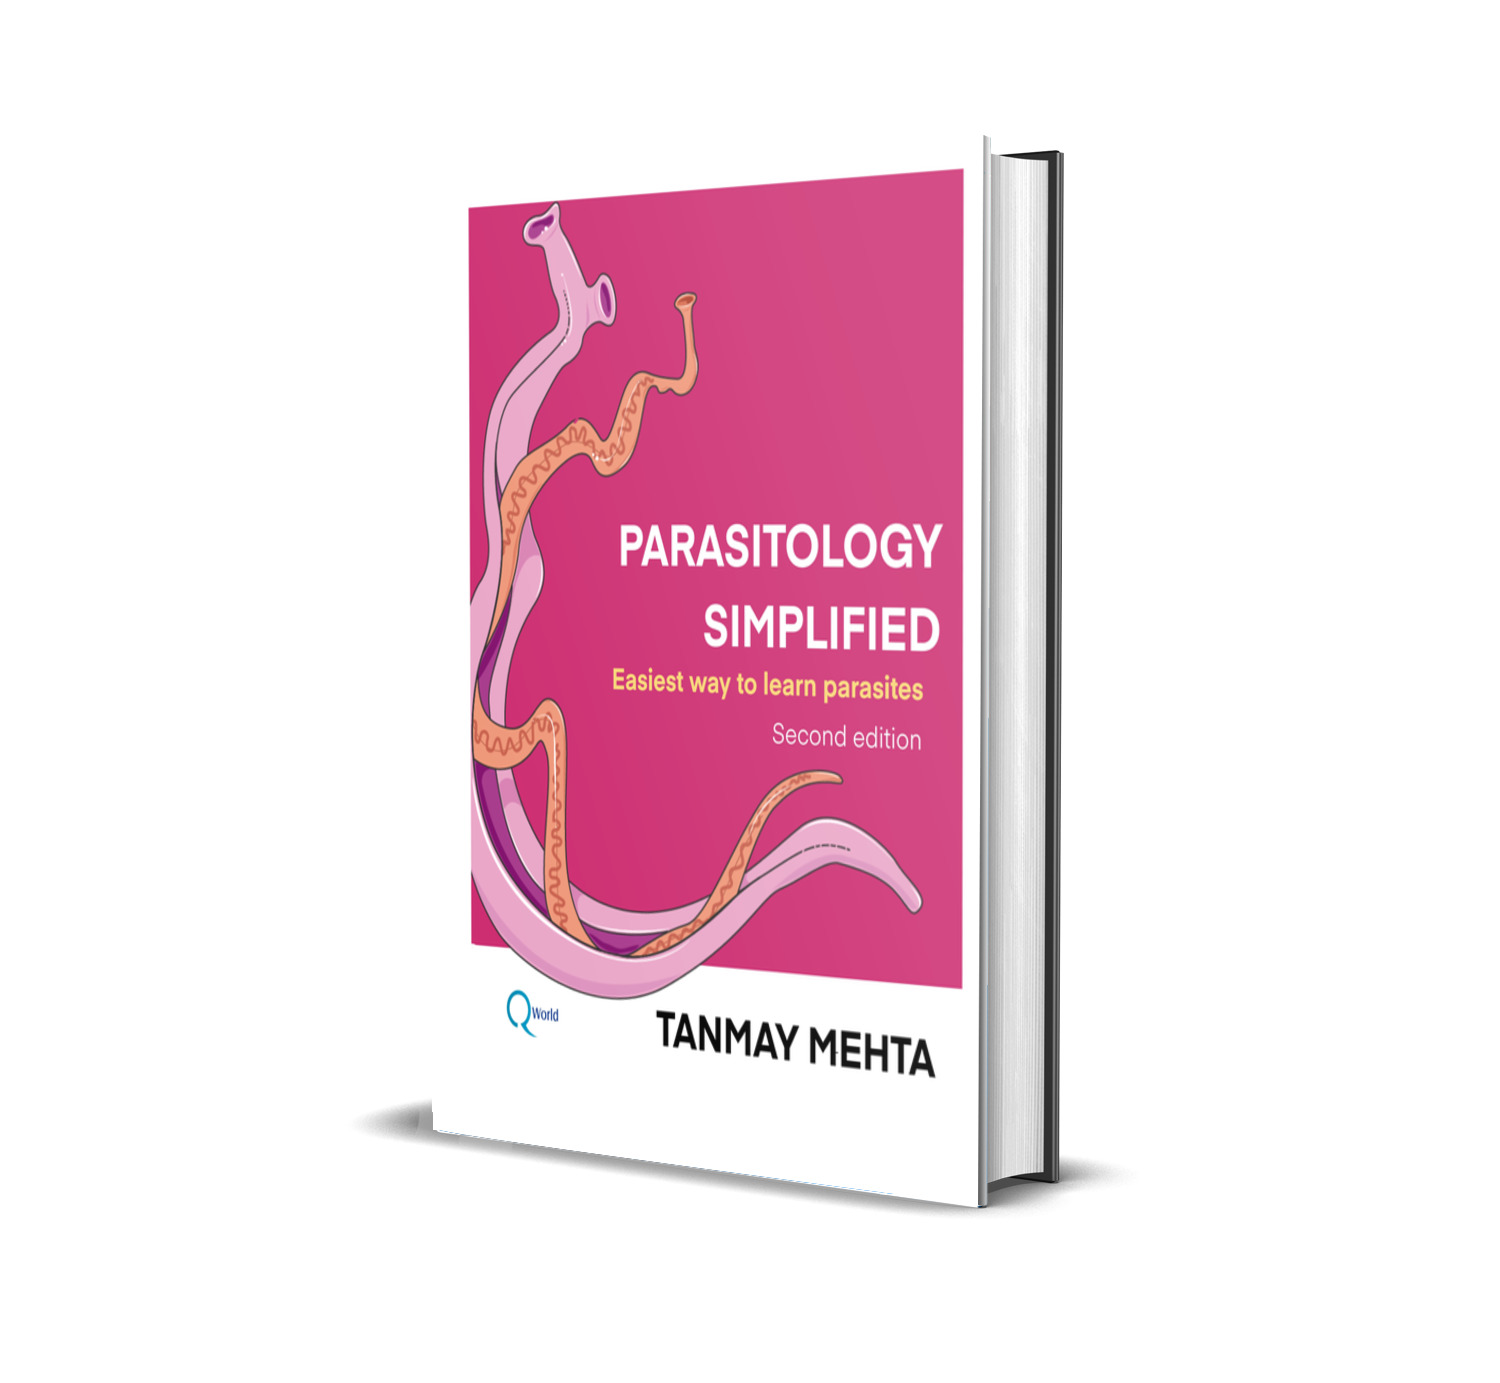 Parasitology Simplified